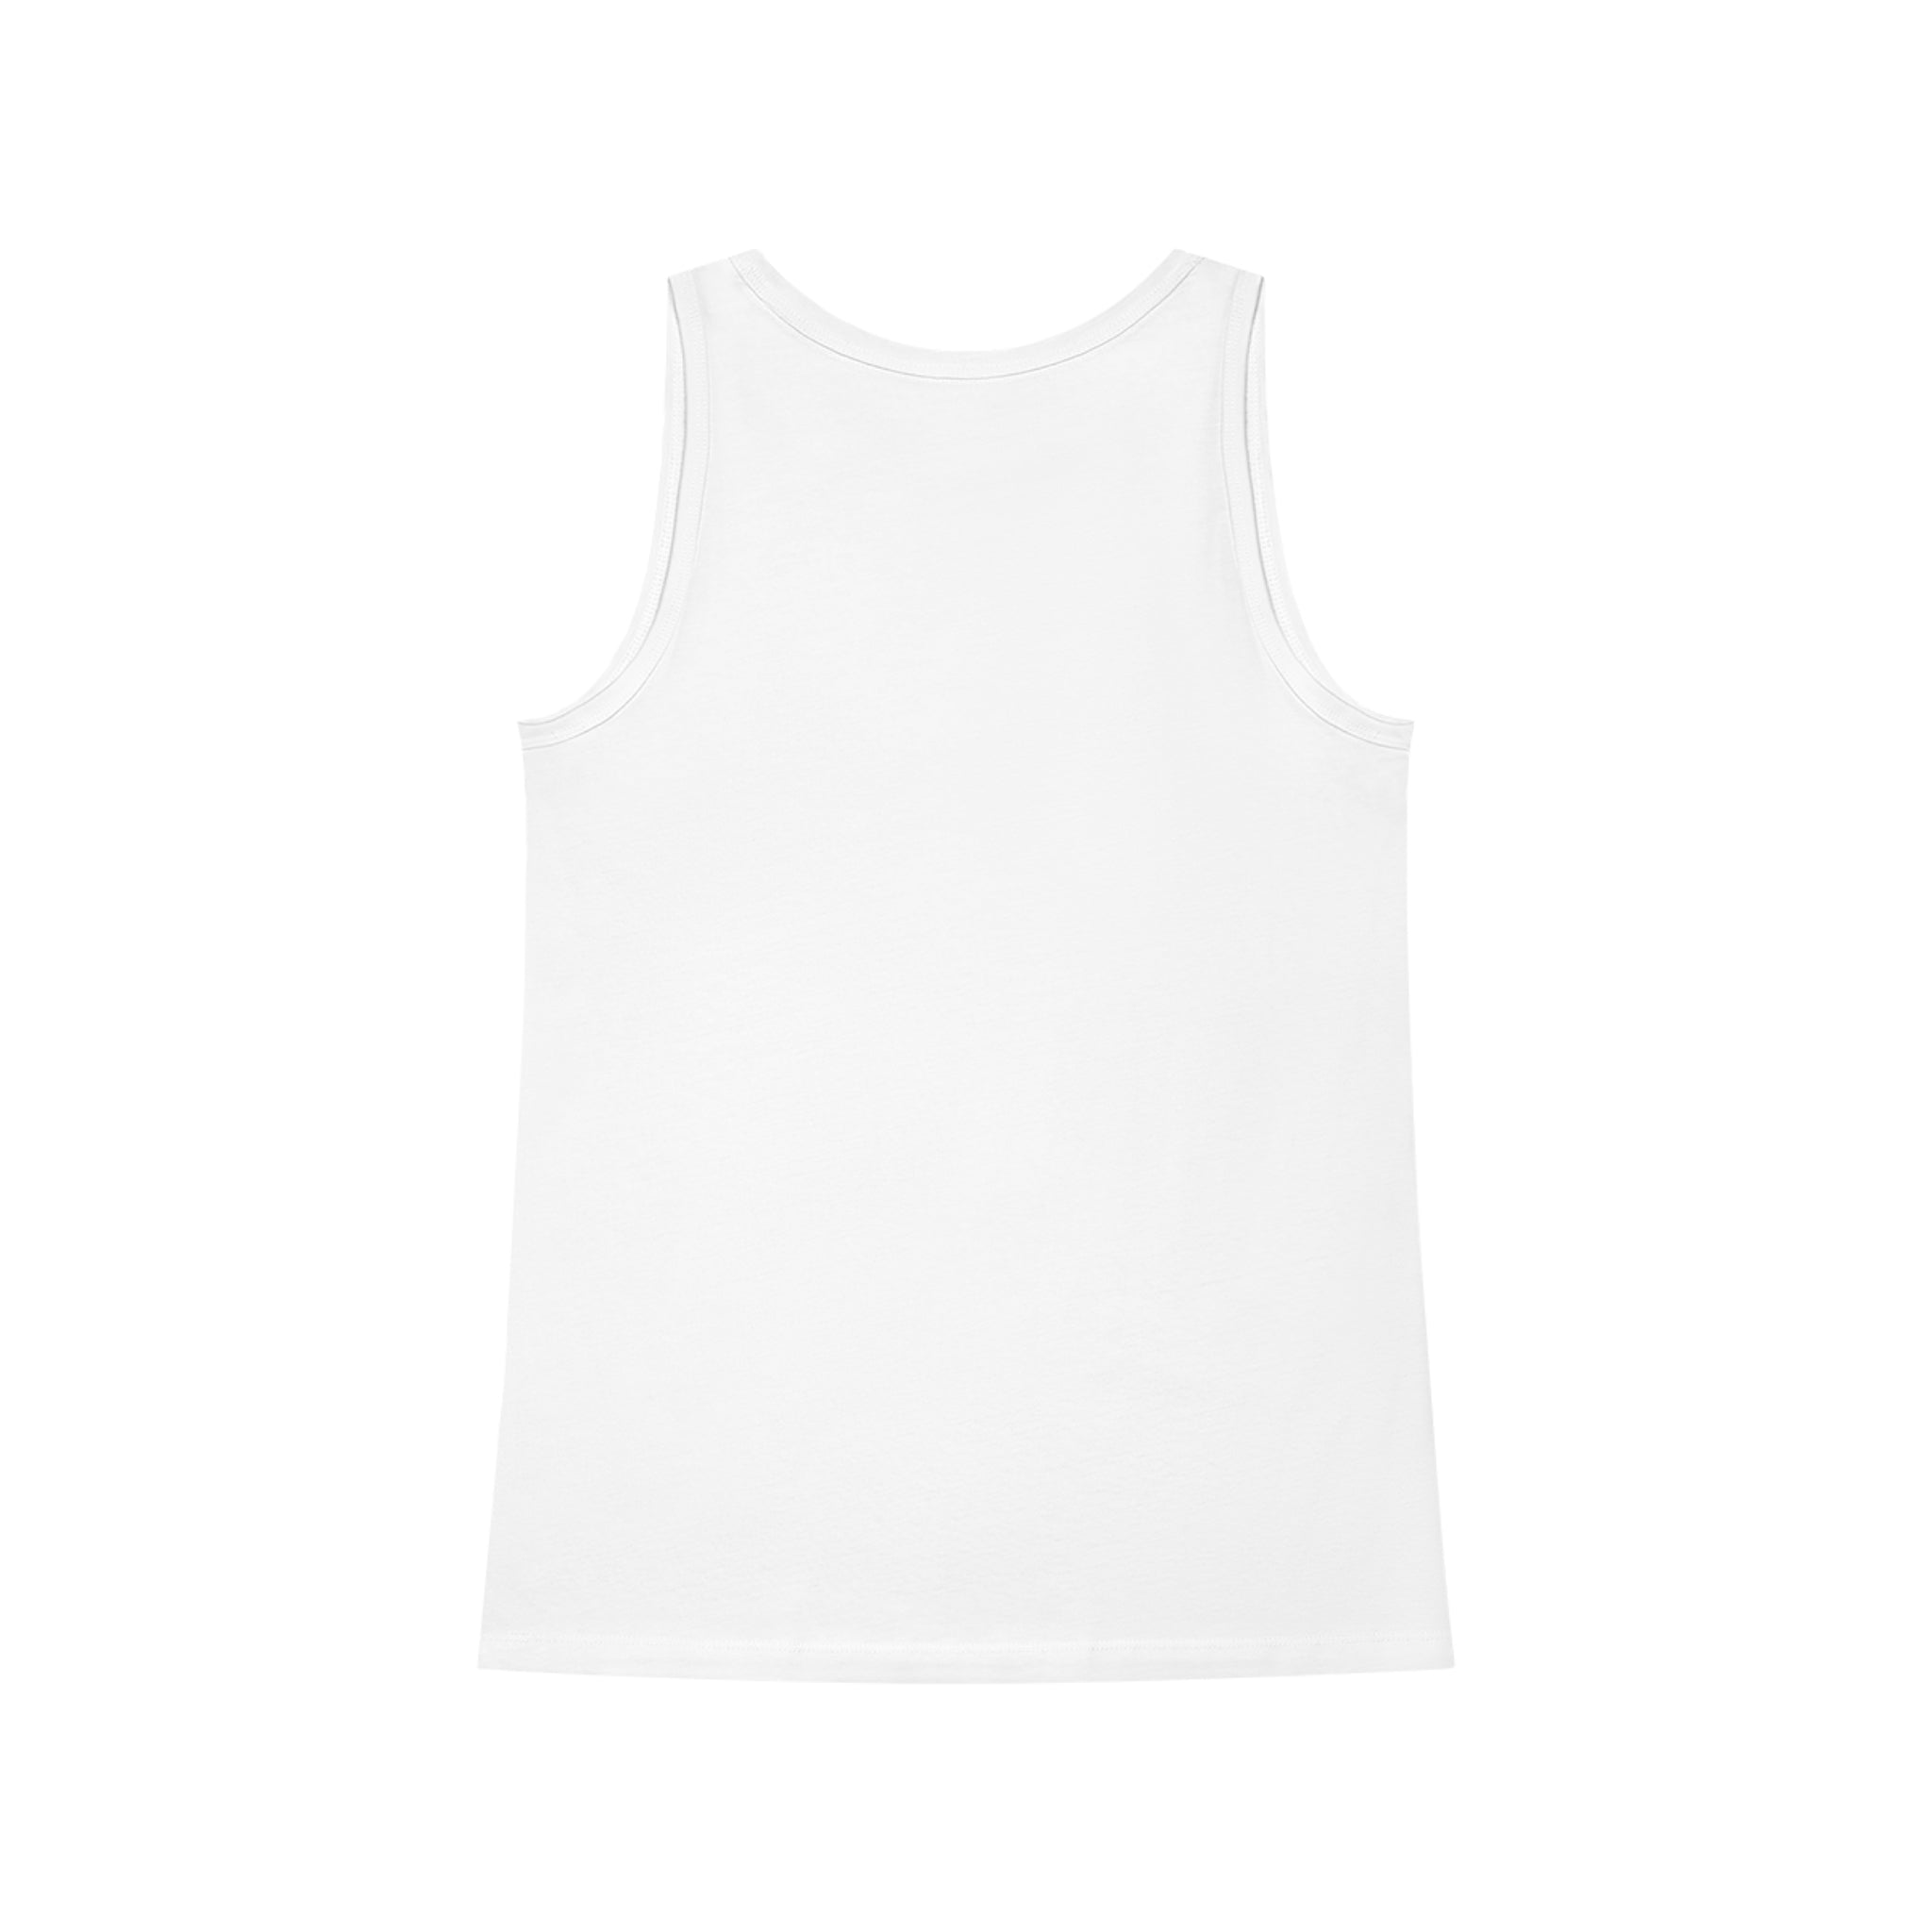 The Rose Tank Top is a white tank top made of organic cotton, perfect for a yoga practice. It stands out against the white background.